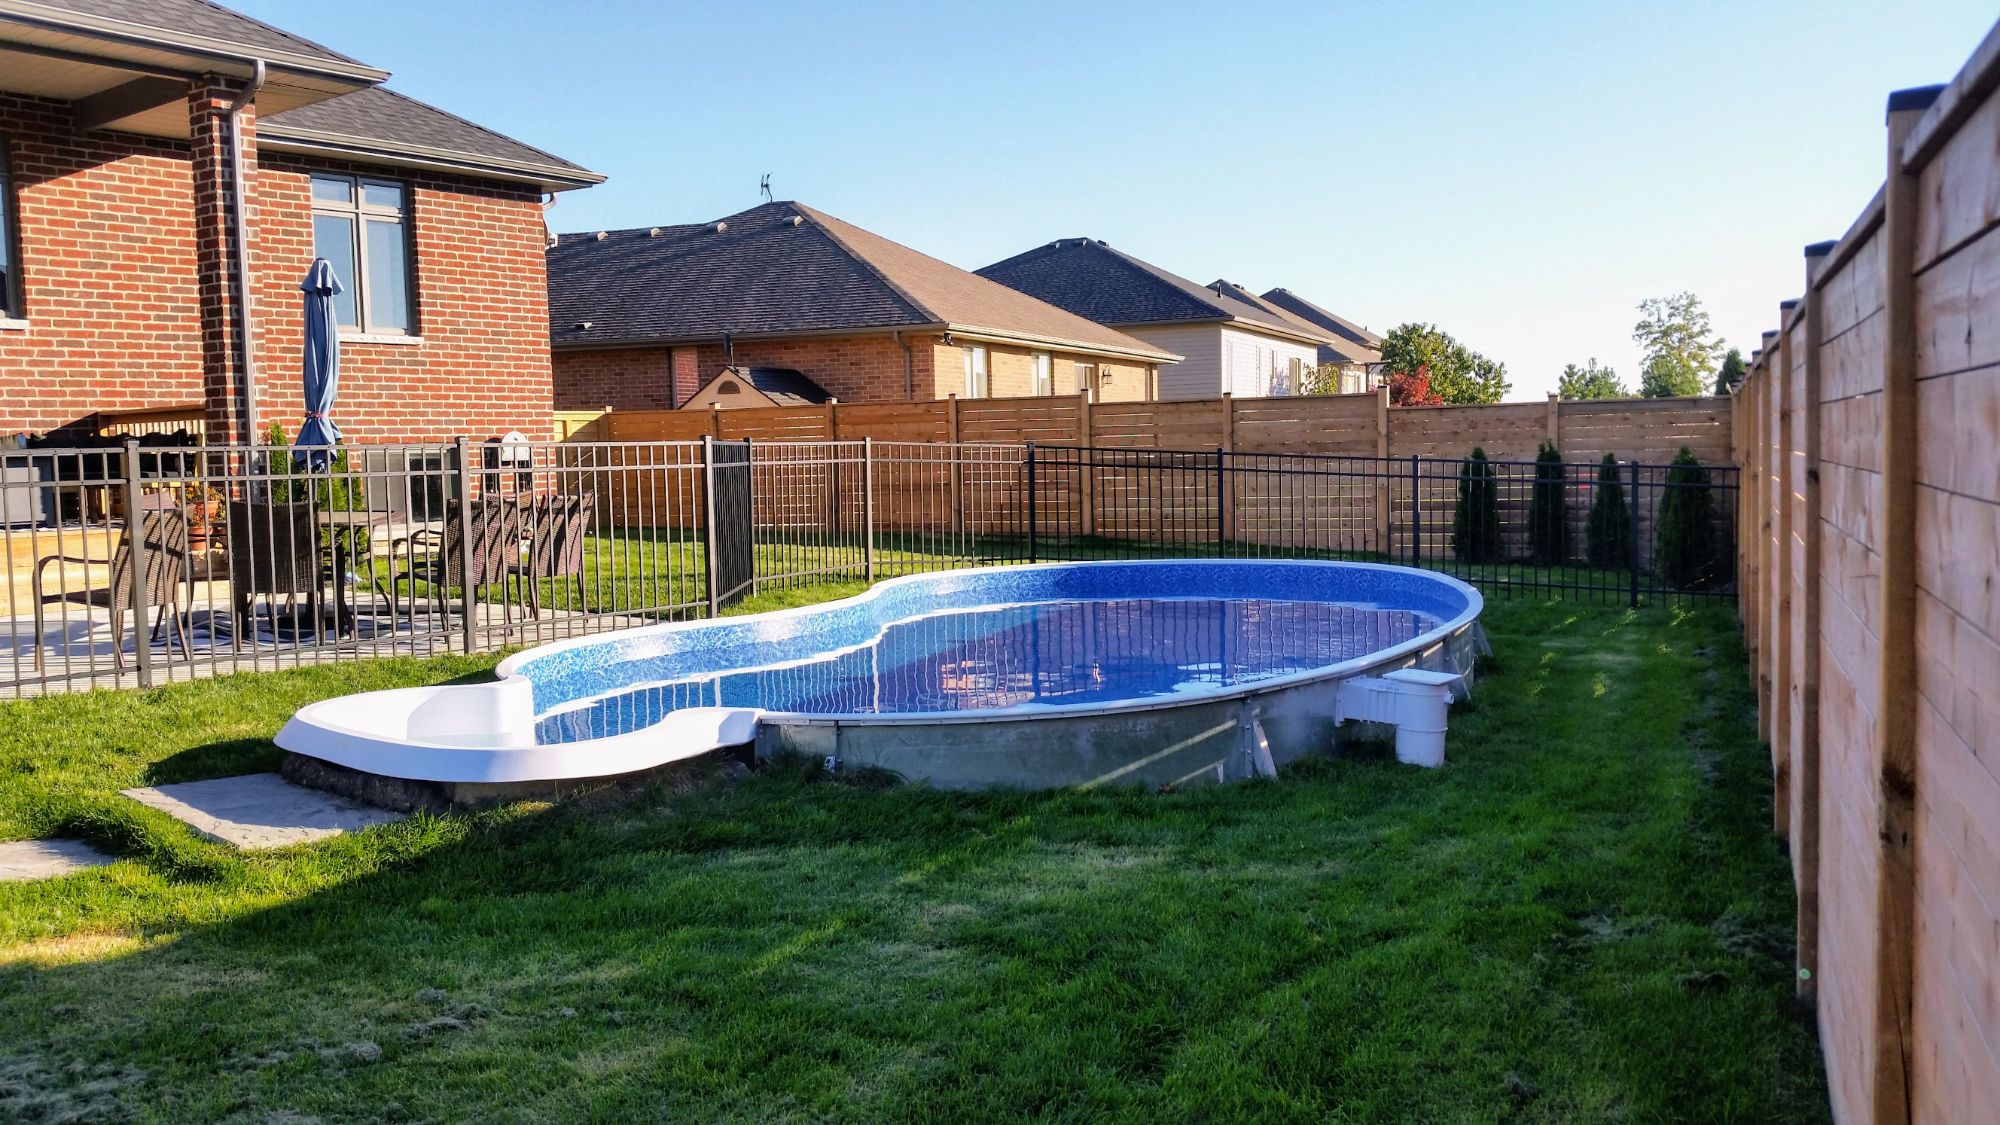 Another return customer to wanted us to install an additional fence around their on ground pool. For us, it was a challenging to work around the pool which required us to curve the fence. But with some thought and planning - we made this fence another masterpiece. Matte Black Aluminum four foot tall in Kingsbridge subdivision in Amherstburg.